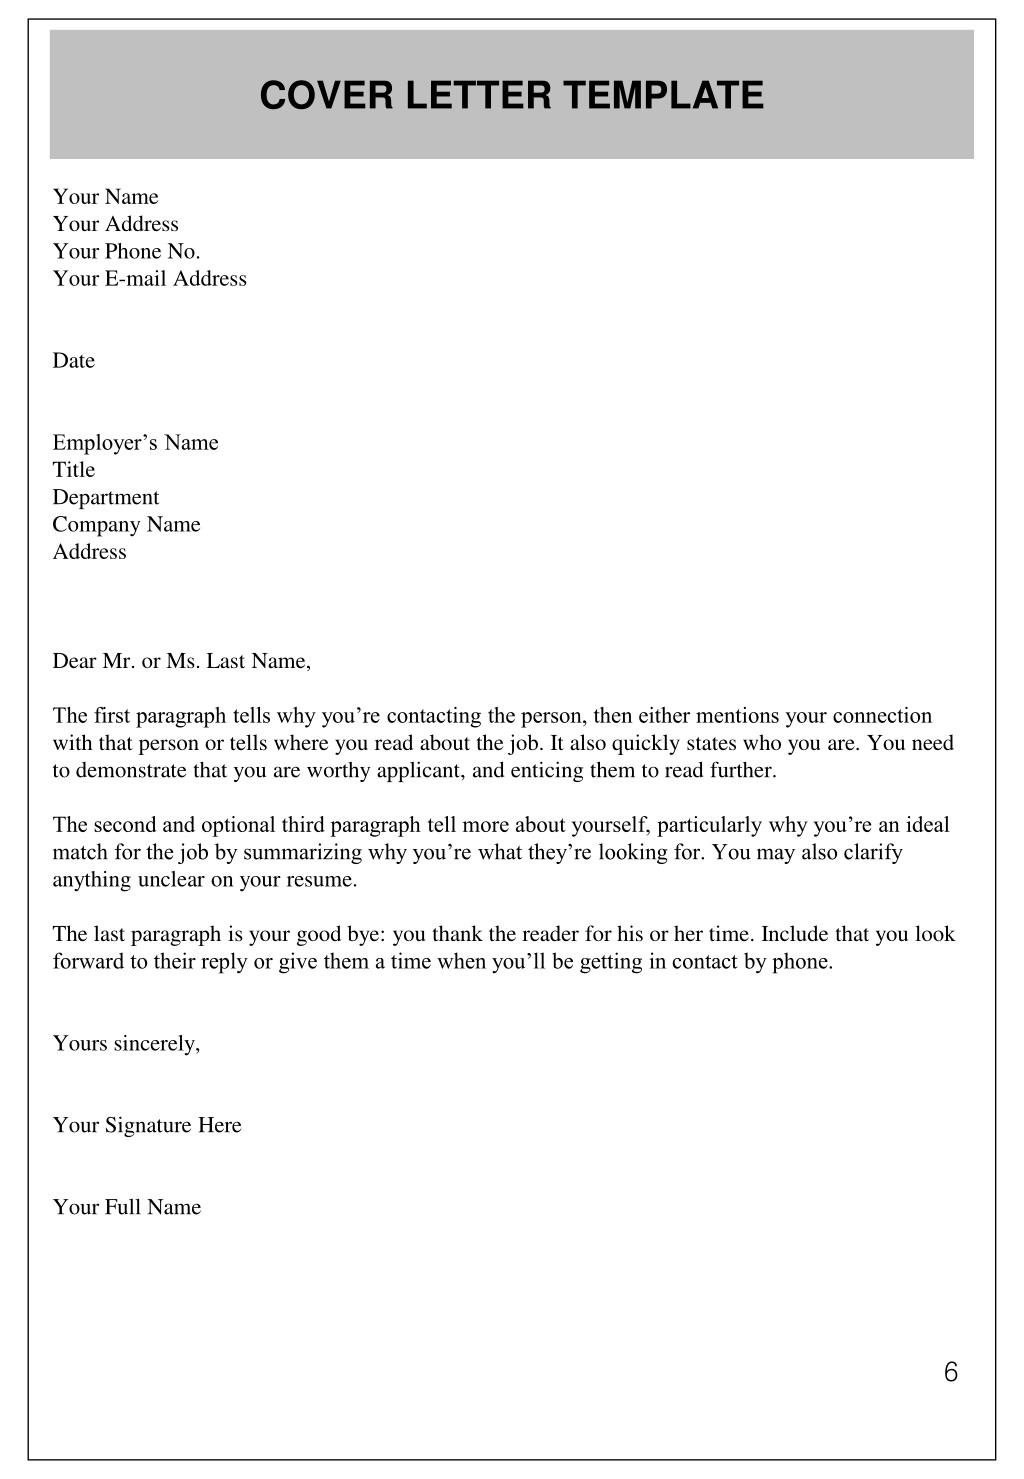 Cover Letter To Company No Name - 100+ Cover Letter Samples